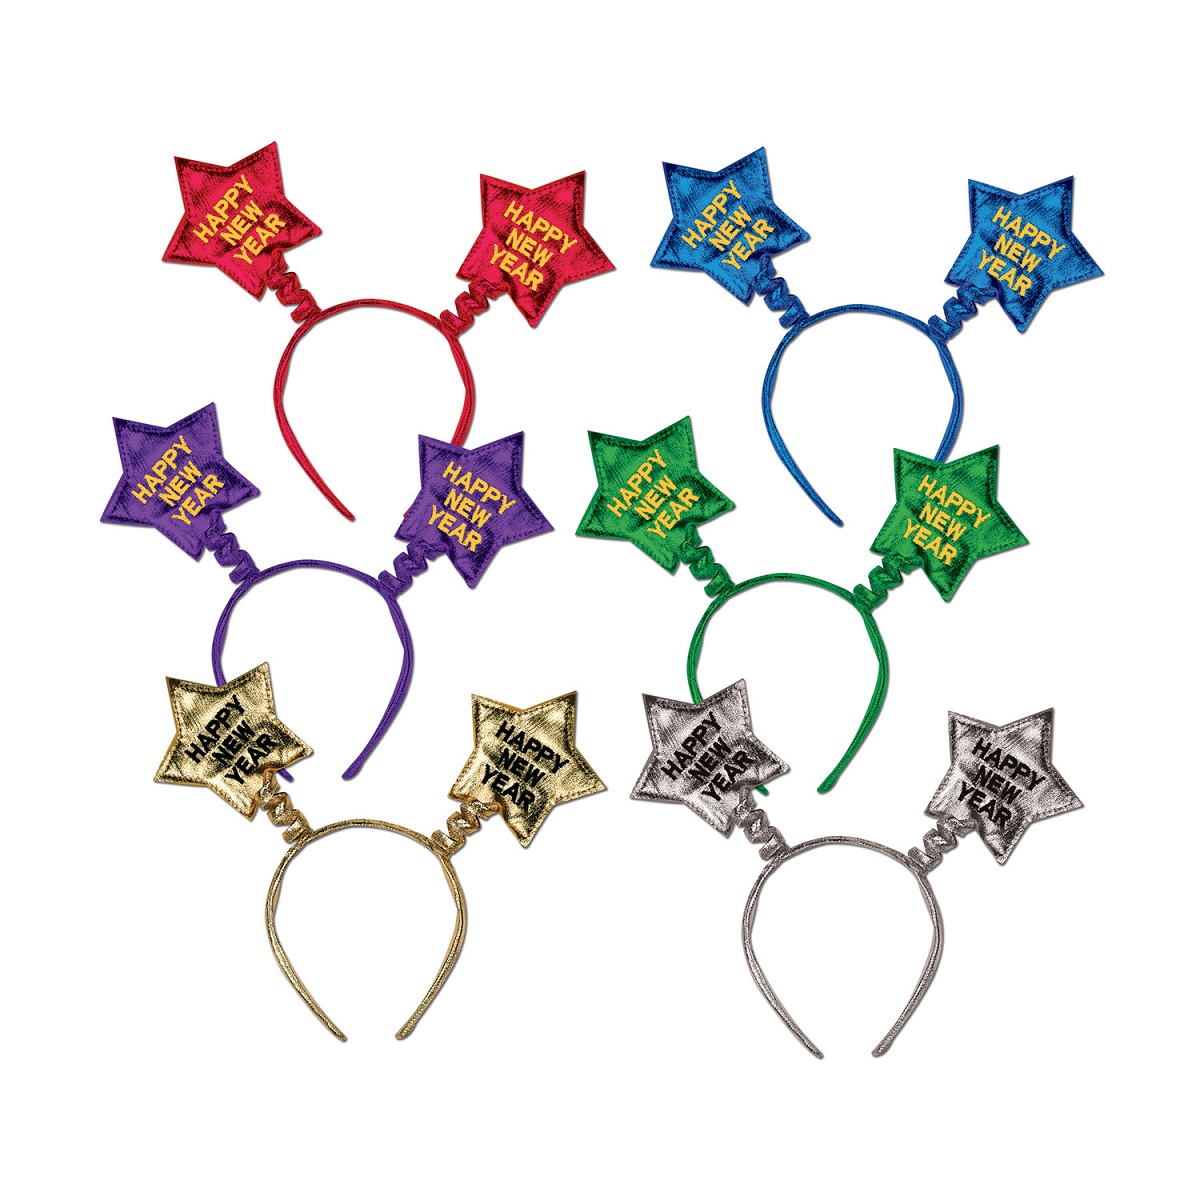 Beistle Club Pack of 12 Vibrantly Colored "Happy New Year" Stars Boppers Headbands - One Size